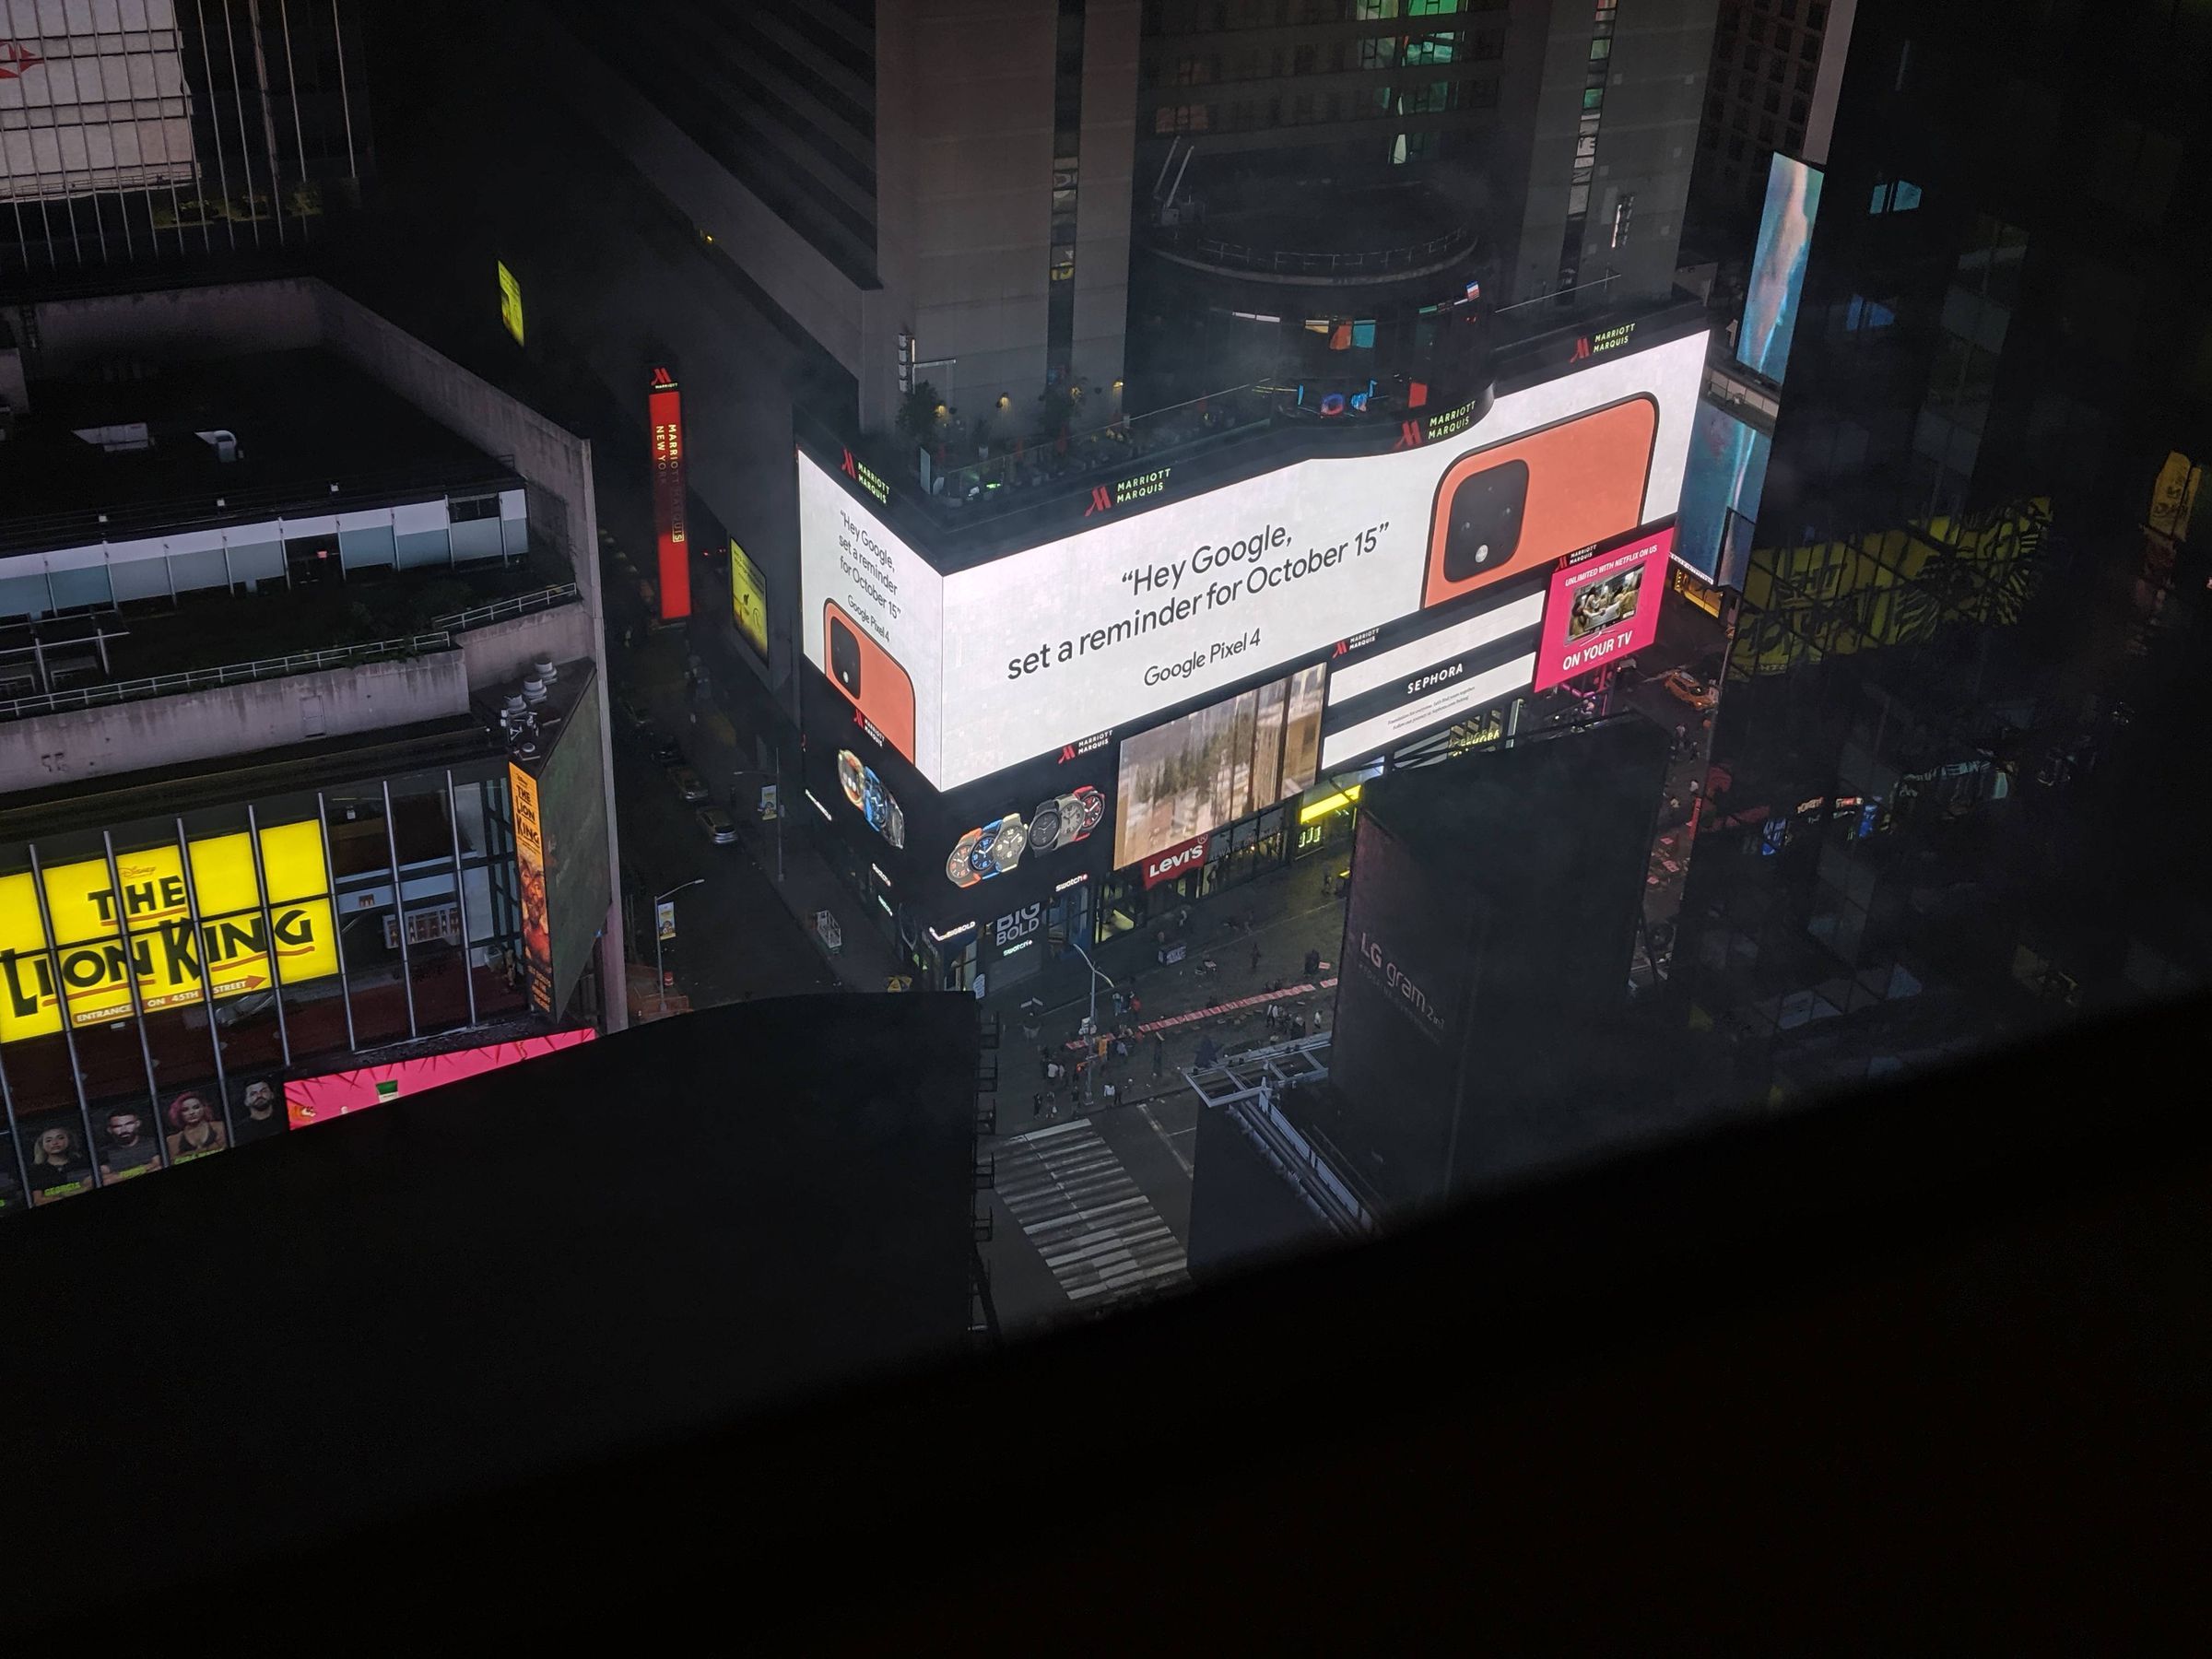 A Pixel 4 ad in Times Square.